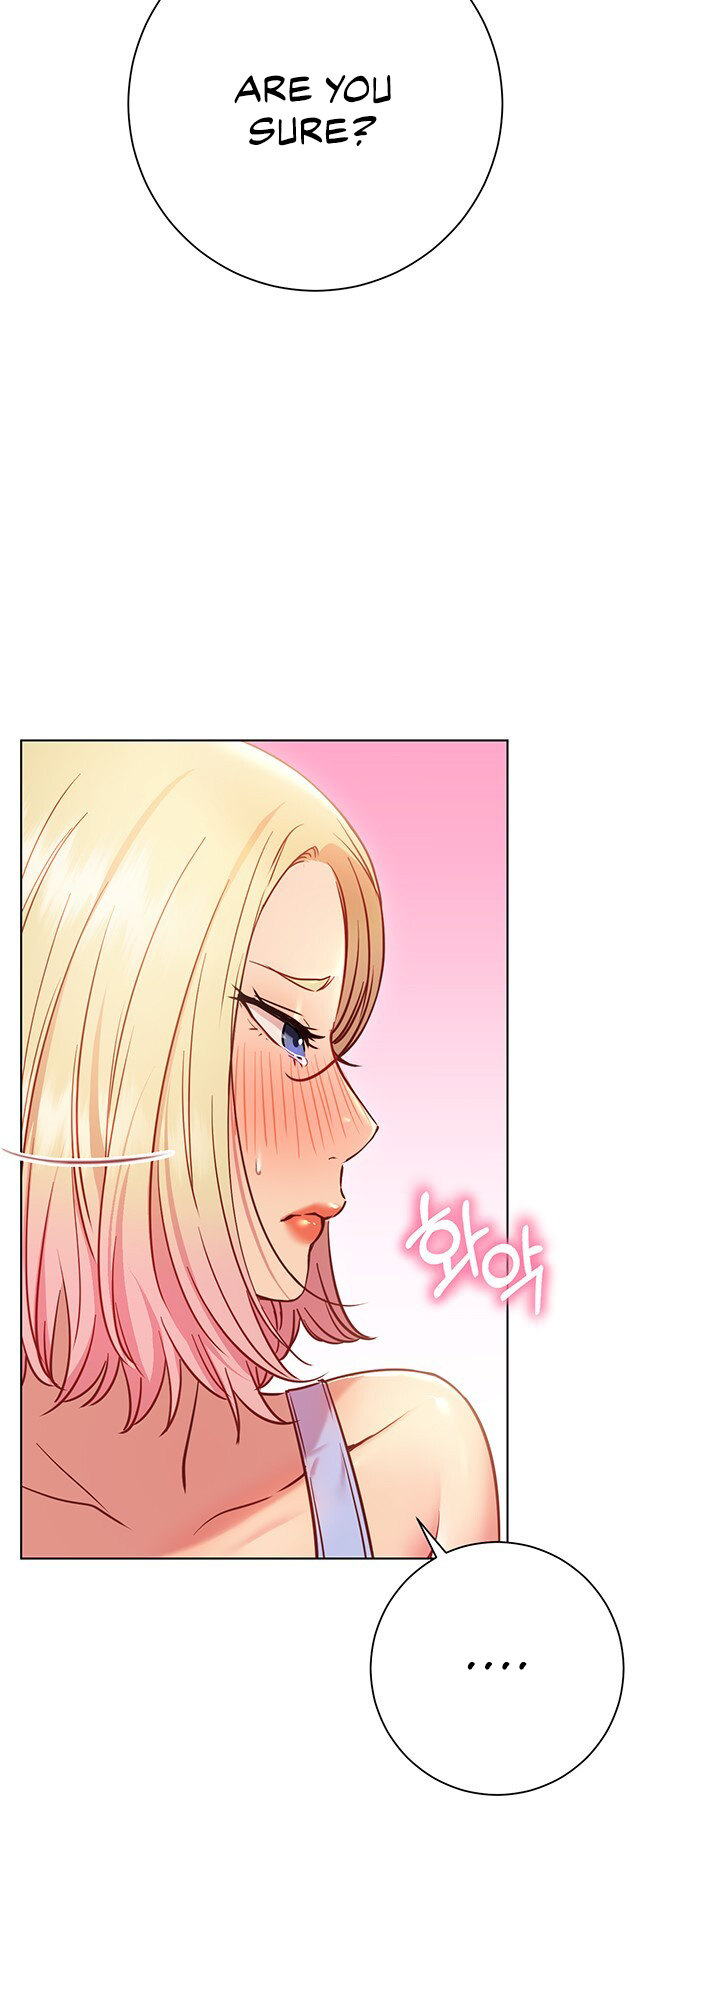 Xem ảnh How About This Pose? Raw - Chapter 18 - 10c4a592f1a3b3fa70 - Hentai24h.Tv